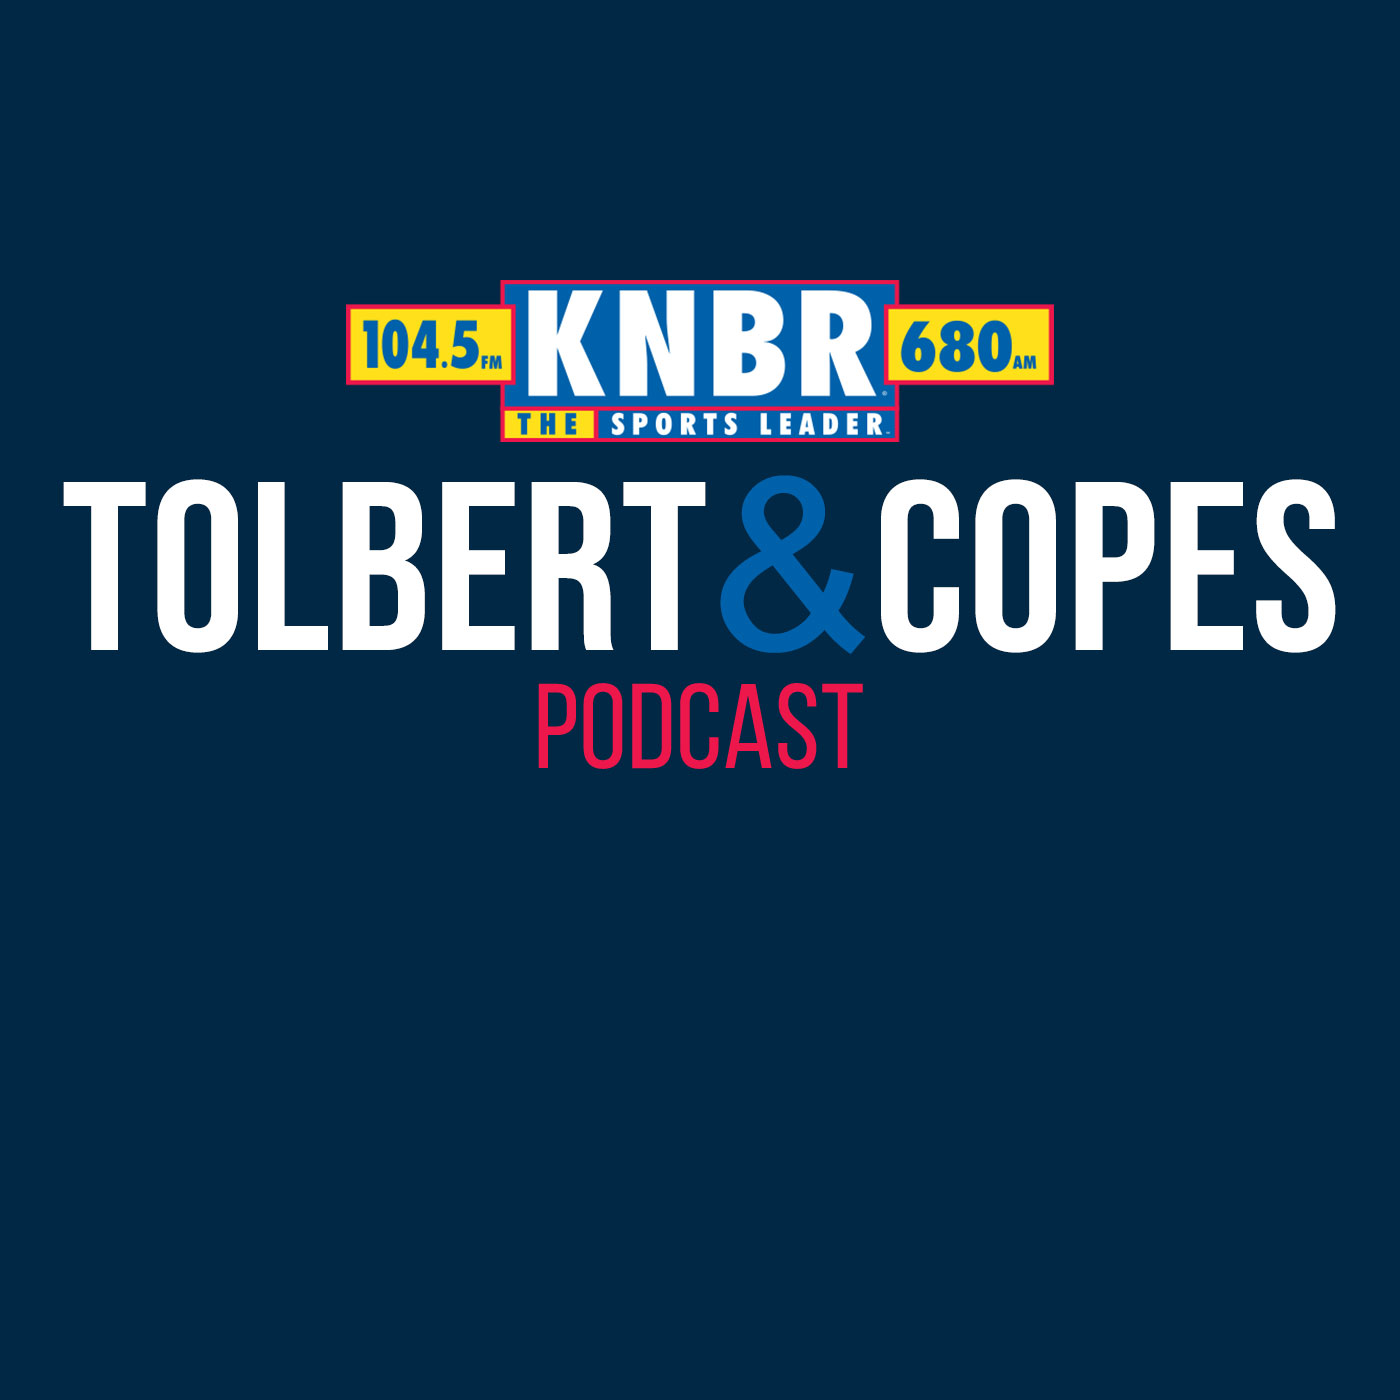 6-21 J.T. Snow joins Copes & Kerry to share fond memories of legend Willie Mays as a young ballplayer with Copes and Crowley as the Giants mourn the loss of an icon